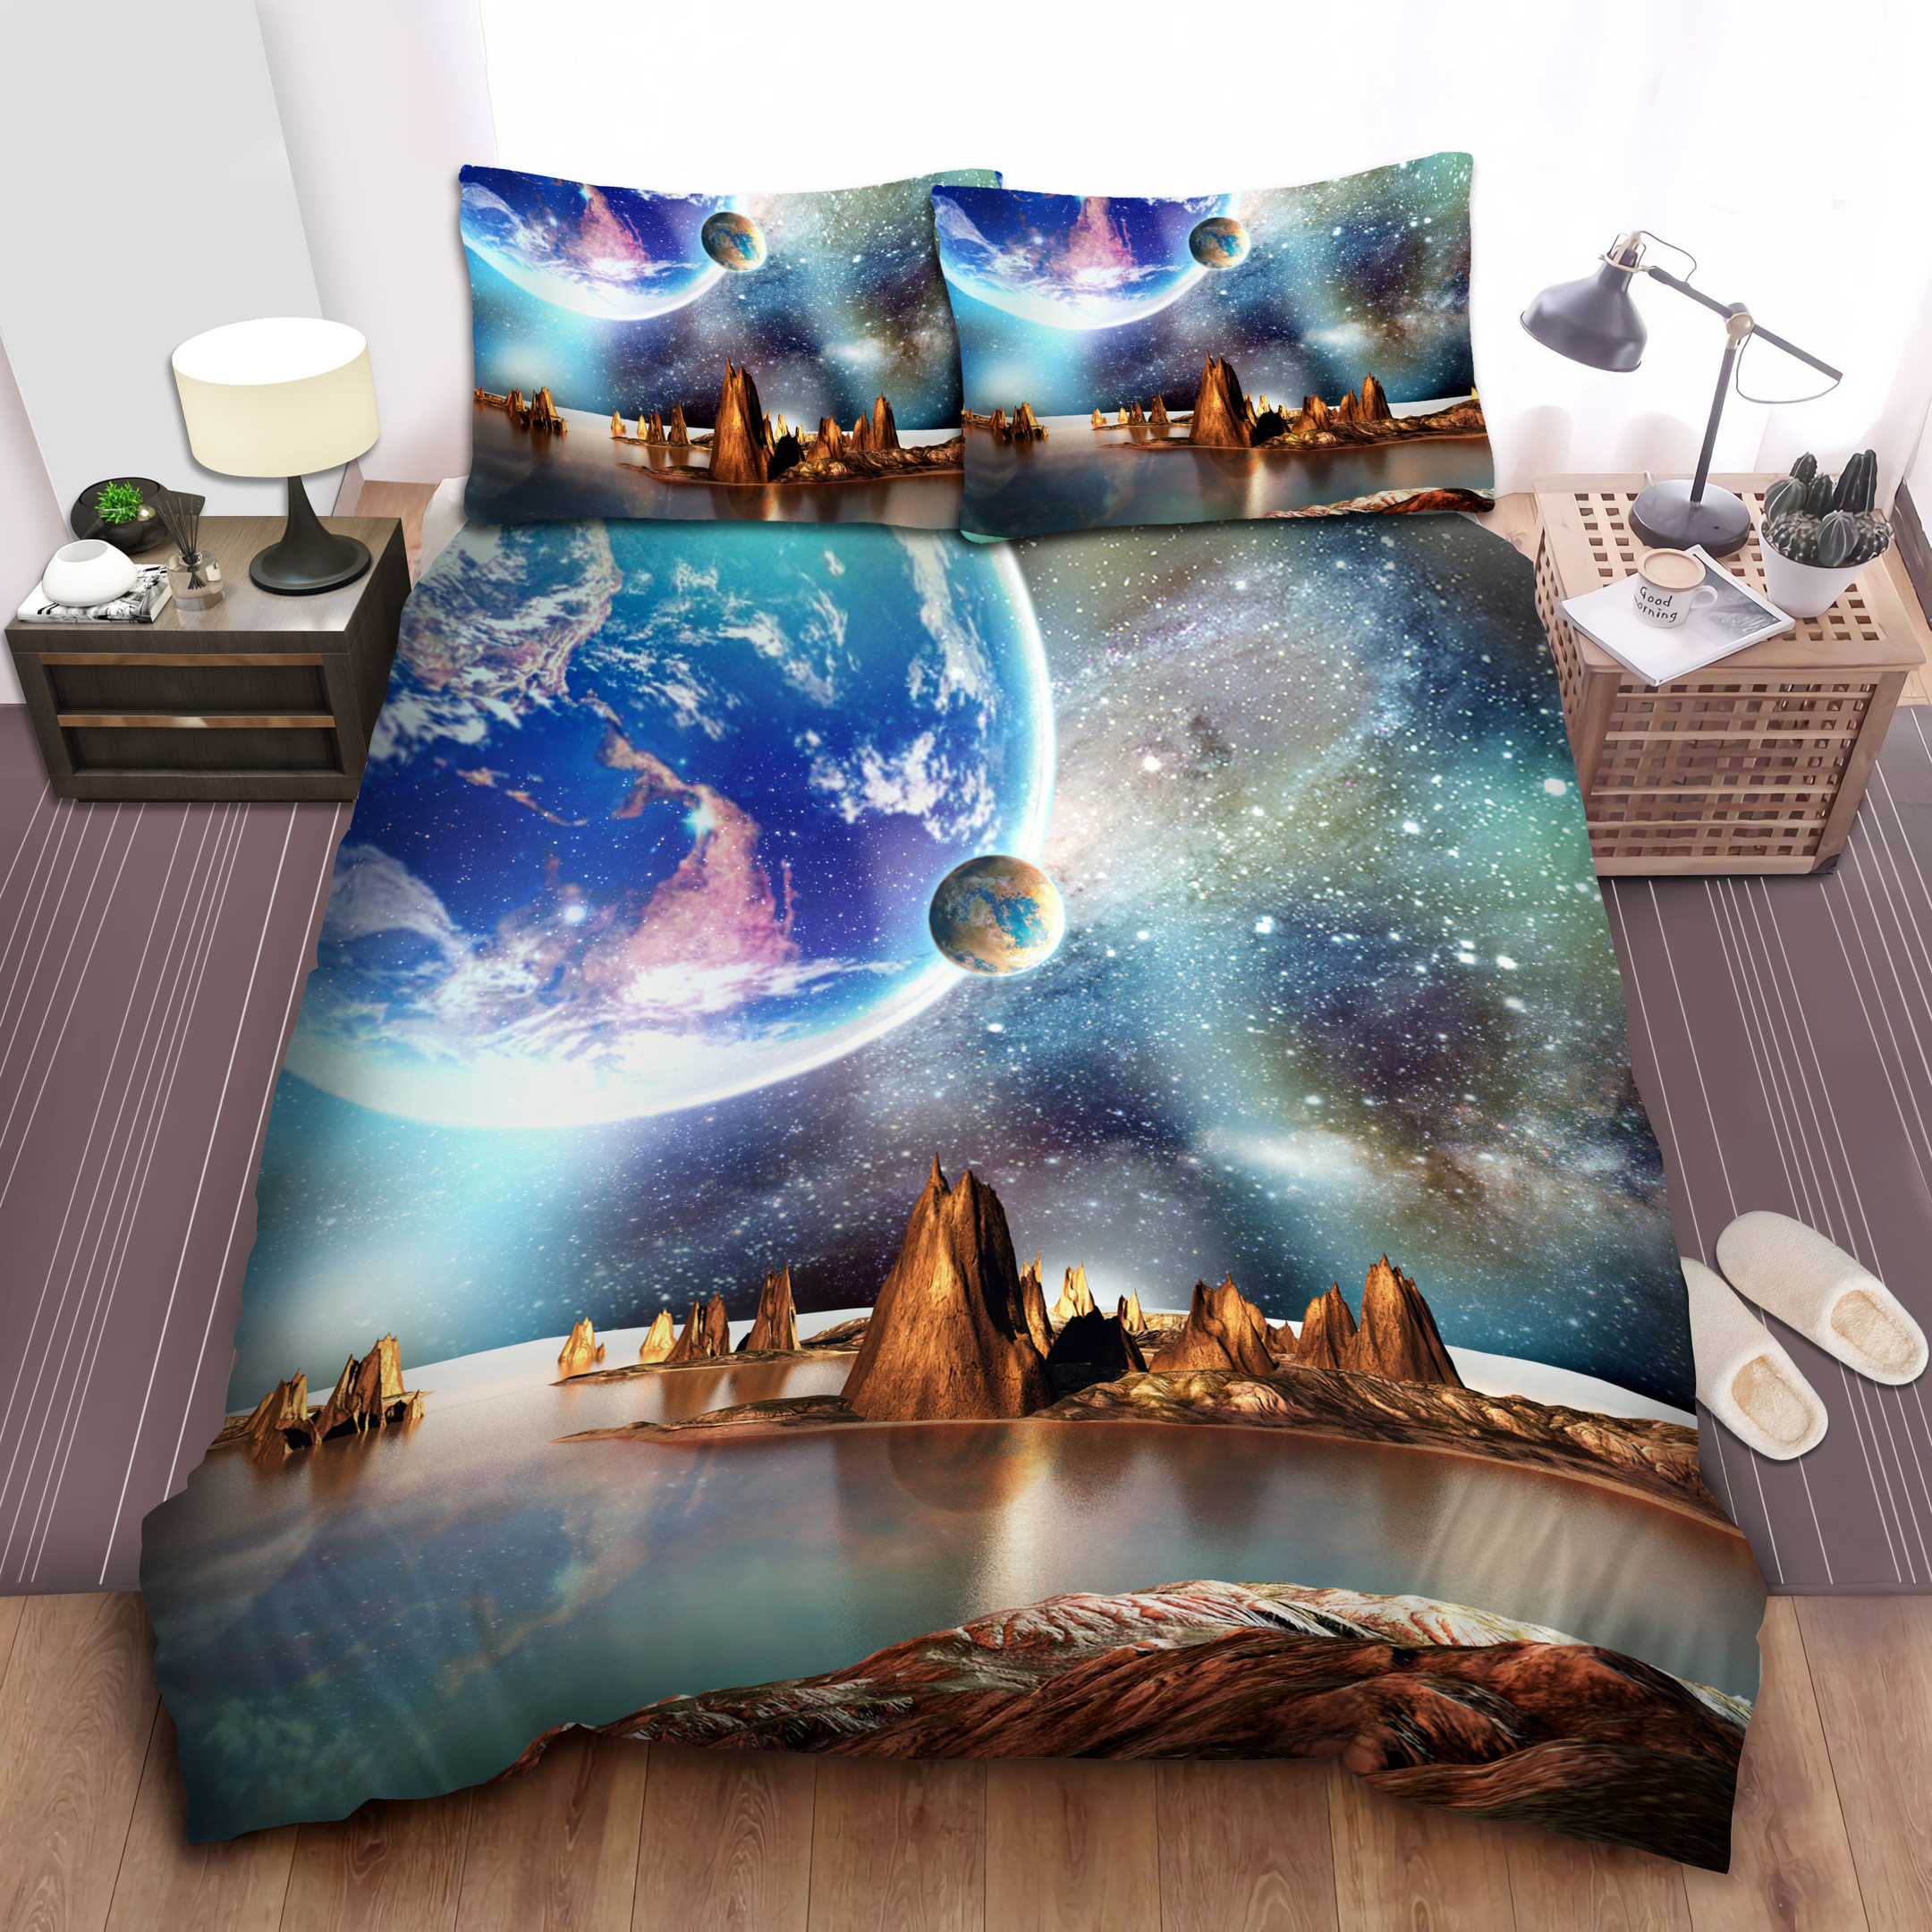 Earth Looking From Another Planet Digital Art Bed Sheets Spread  Duvet Cover Bedding Sets